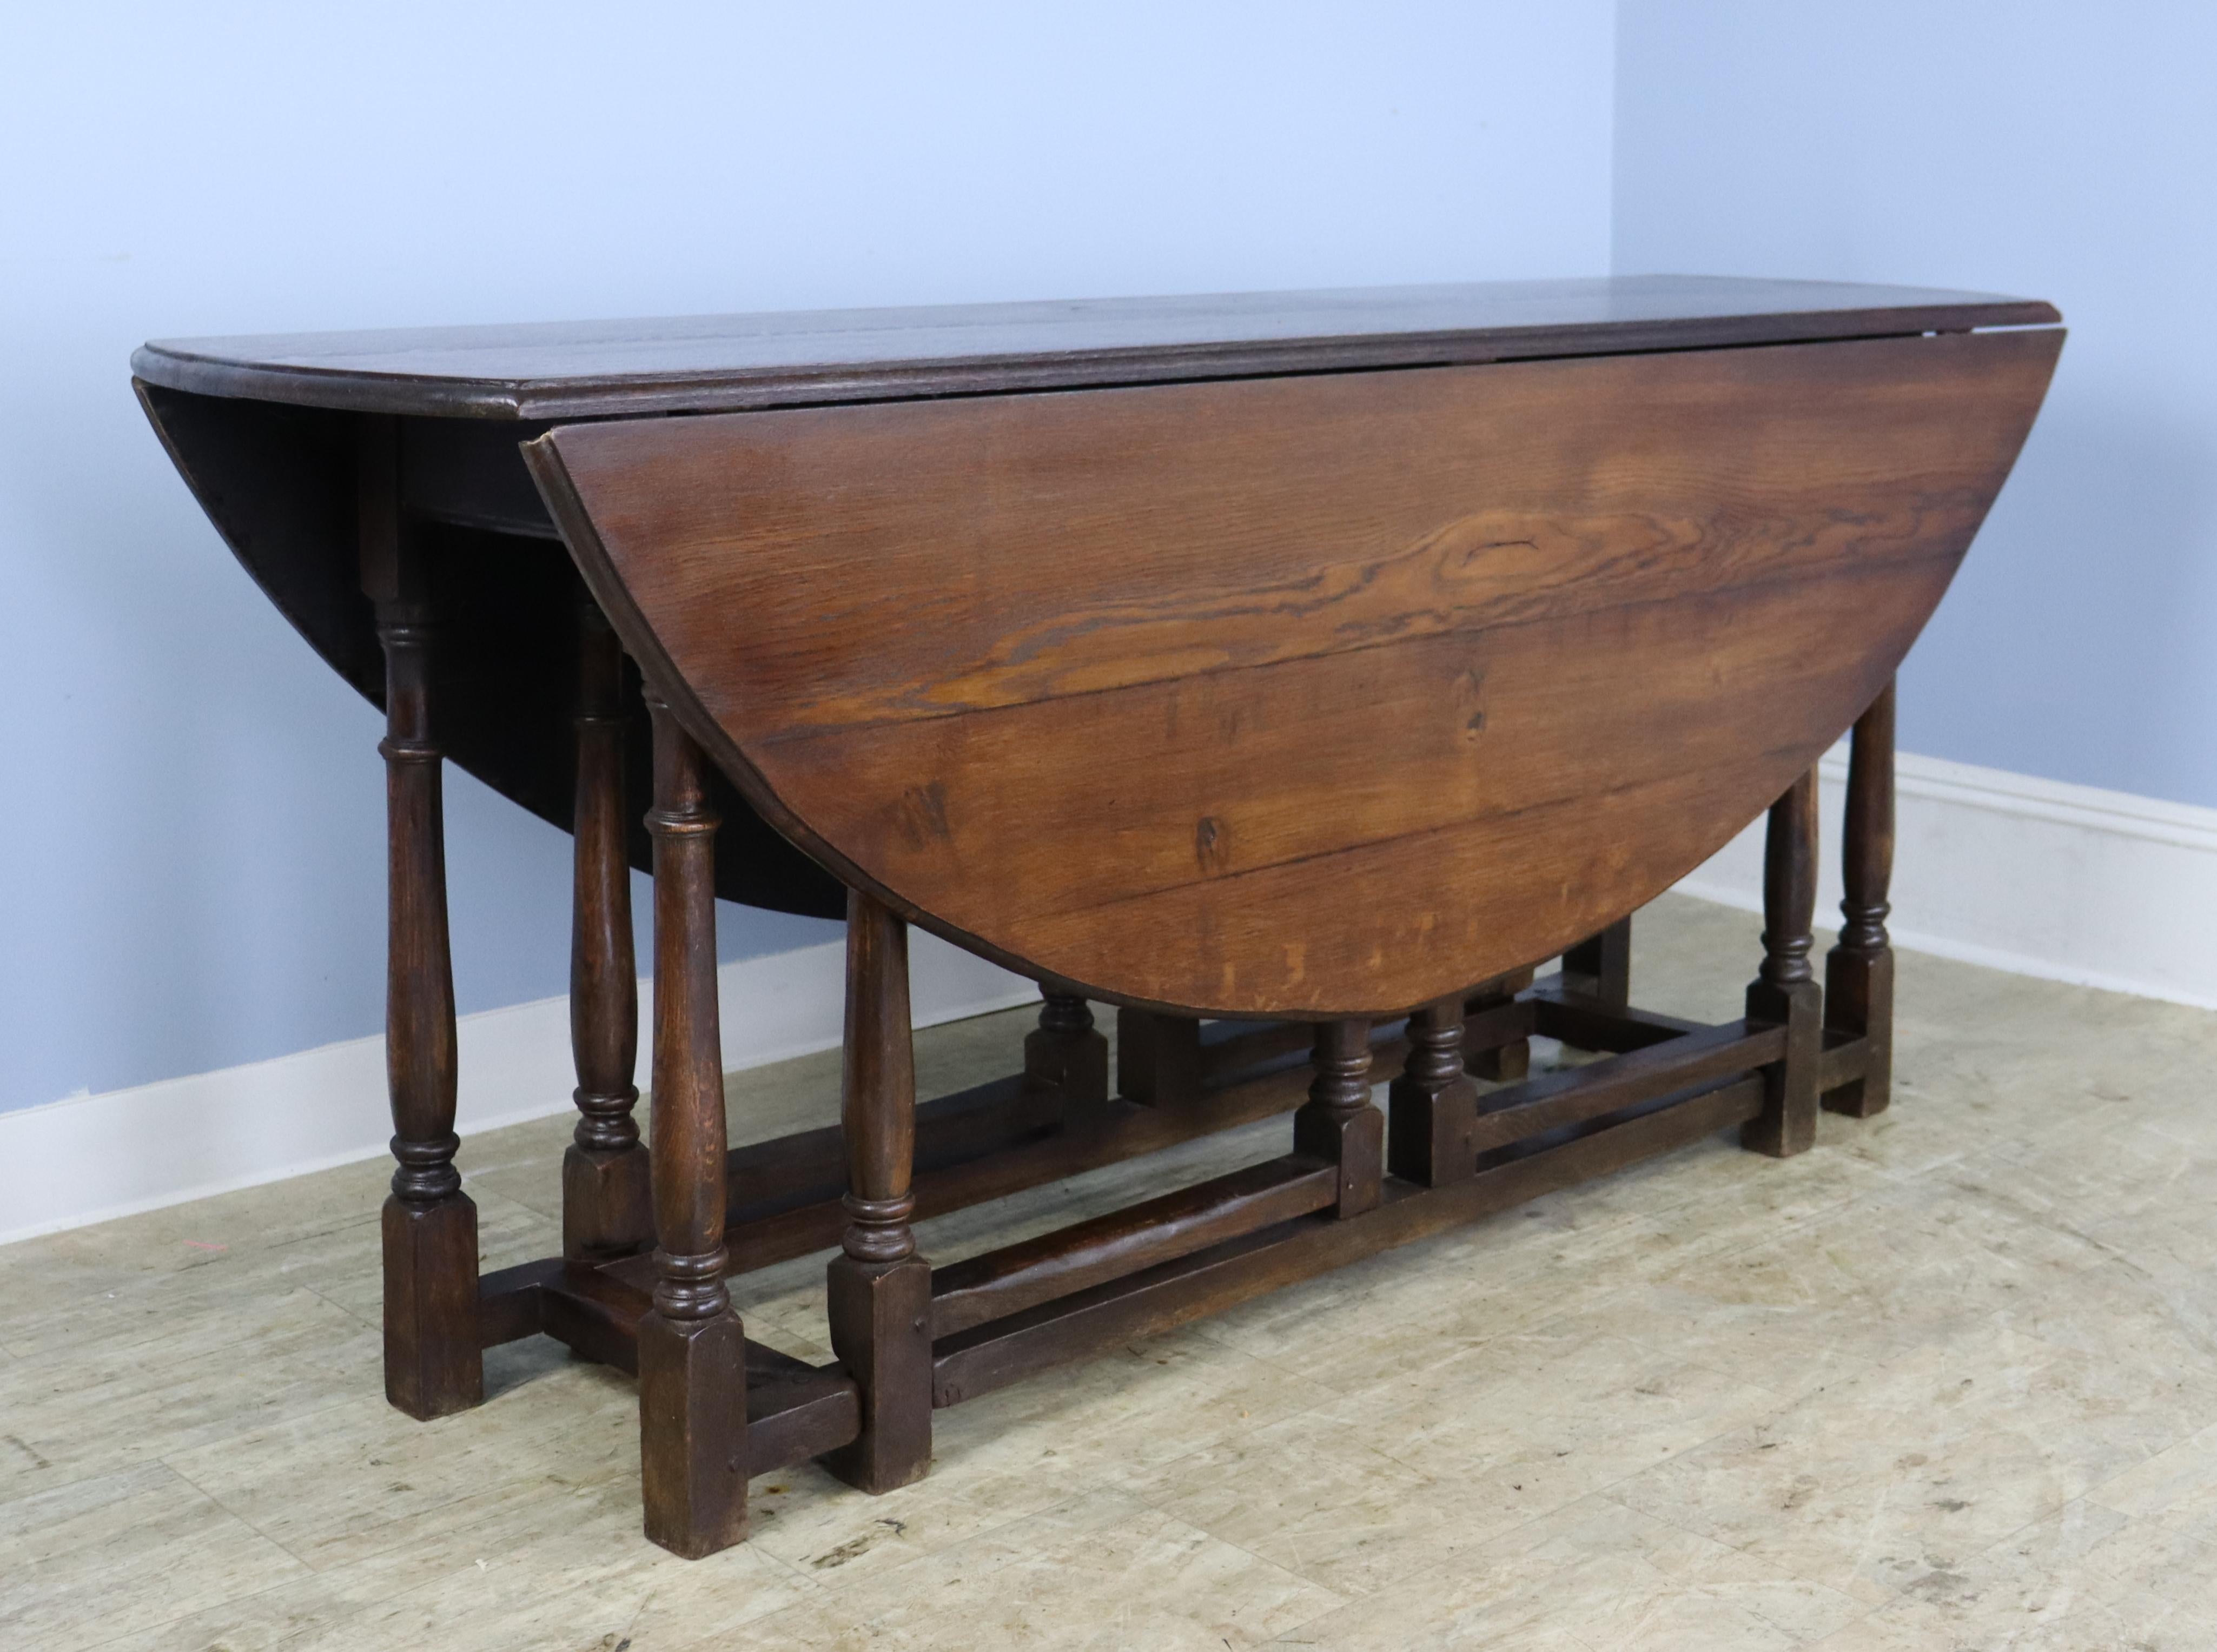 A dropleaf table in rich English oak, to be tucked away or used as an elegant sofa table.  It opens to a large oval which can seat 6 when the legs are opened all the way, or 8 when opened on the diagonal.  (See images 4 and 5).  The turned legs lend